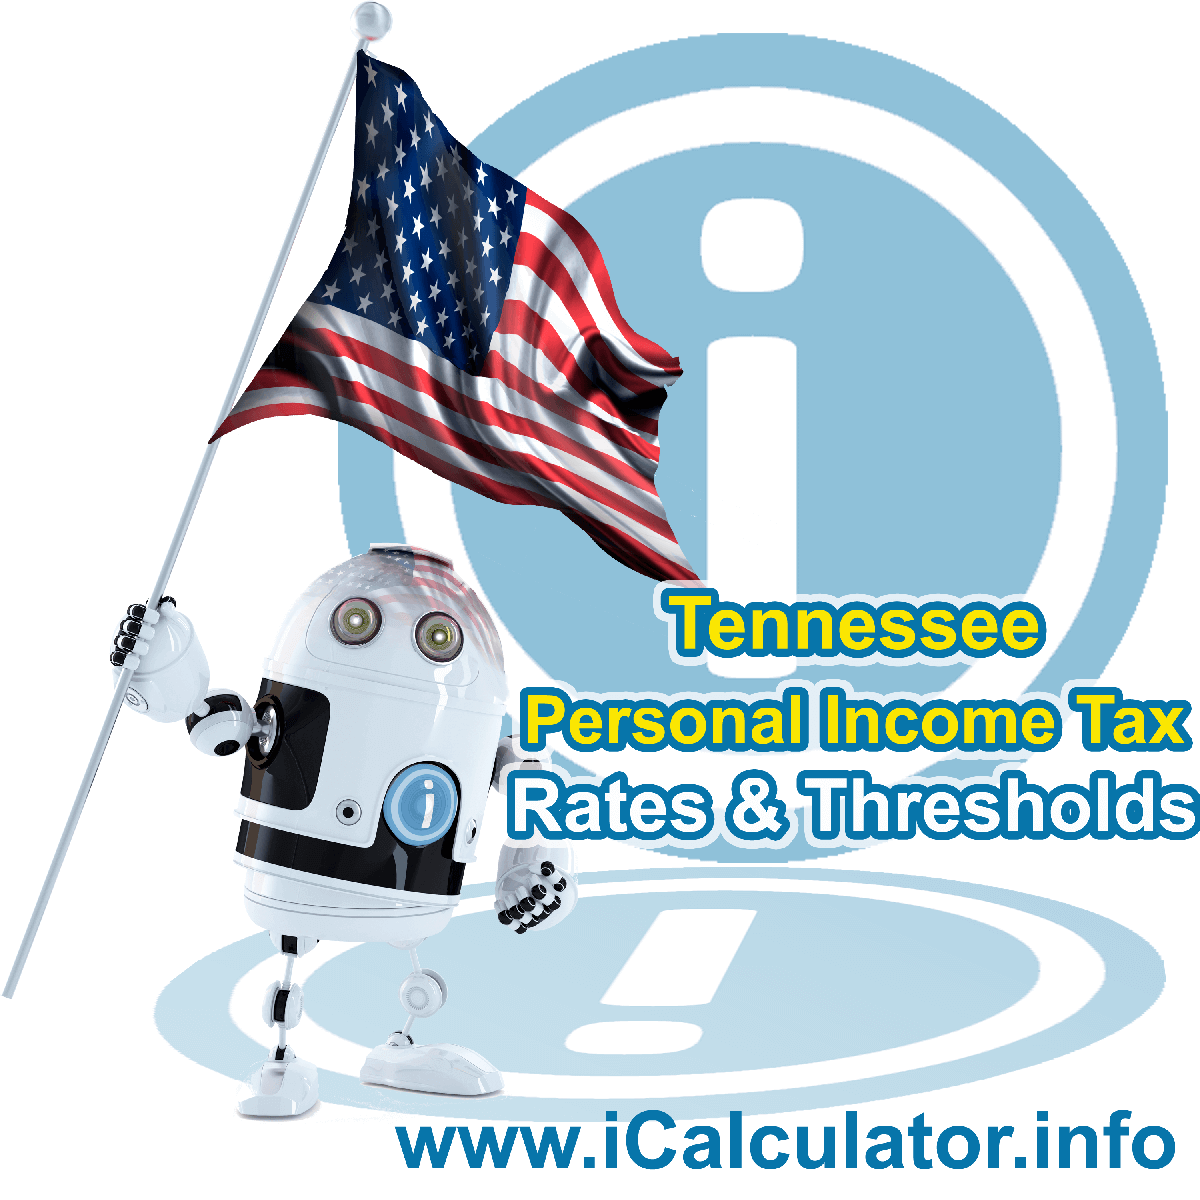 Tennessee State Tax Tables 2021. This image displays details of the Tennessee State Tax Tables for the 2021 tax return year which is provided in support of the 2021 US Tax Calculator